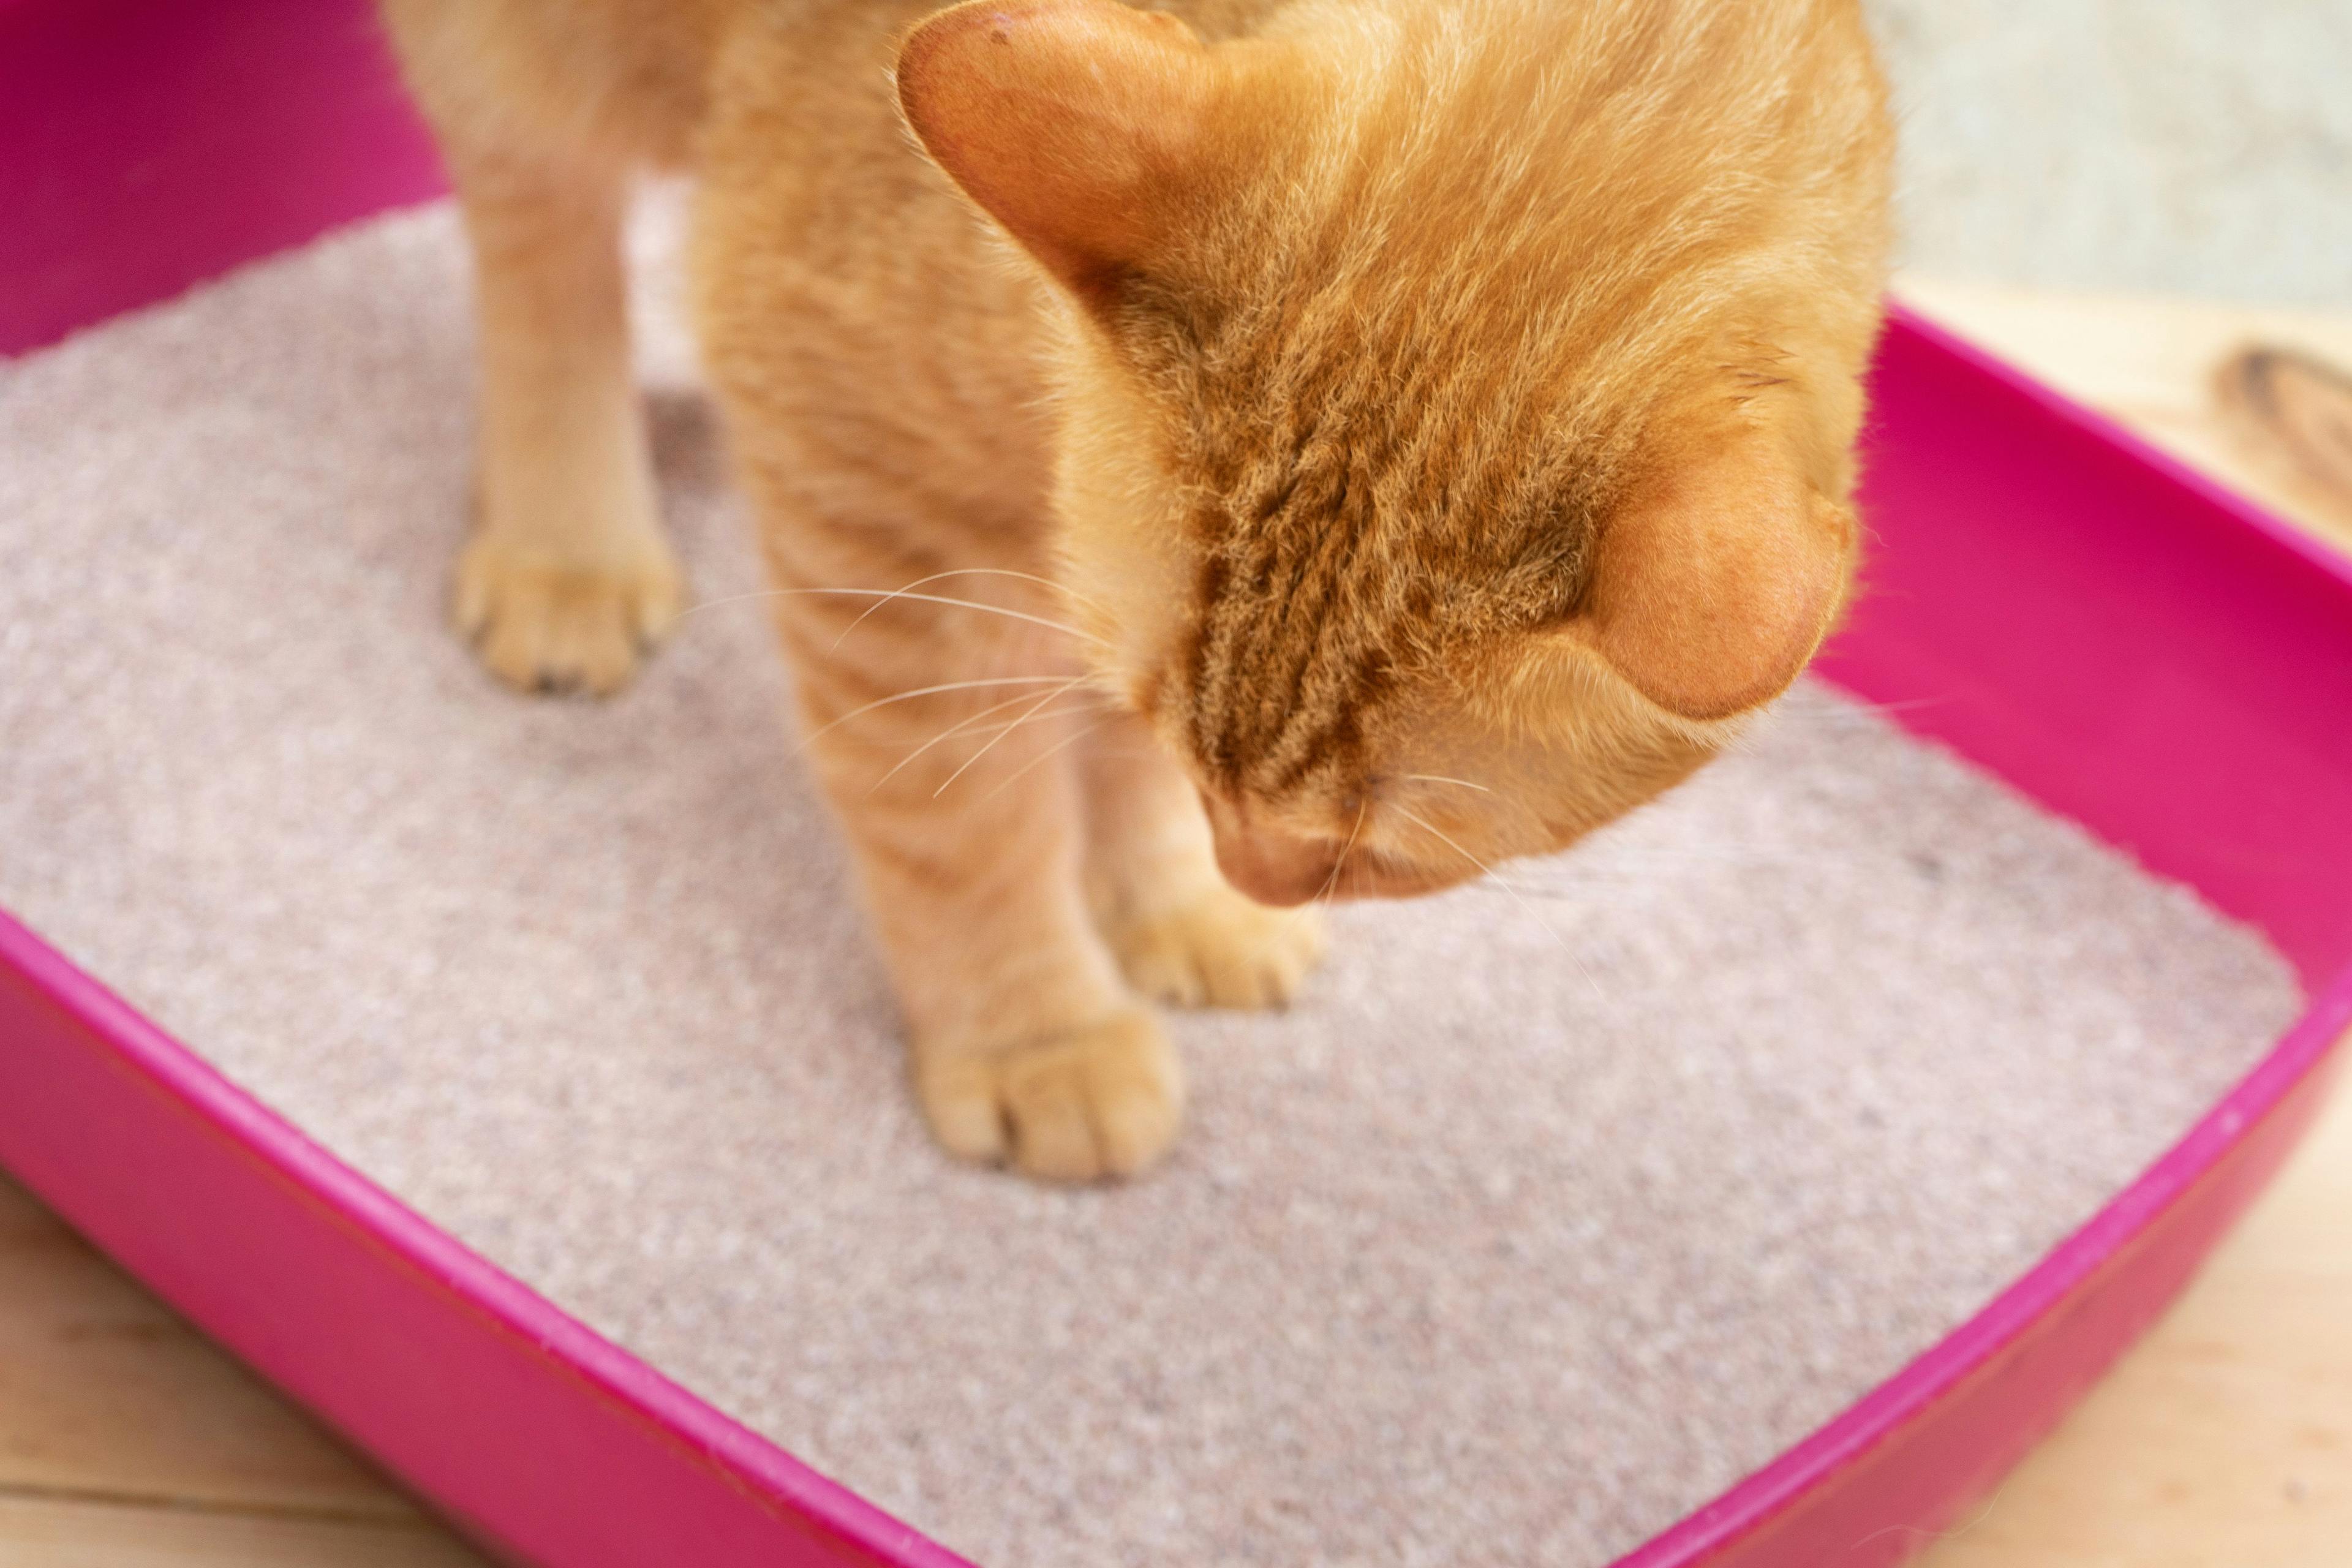 Feline idiopathic cystitis: What it is and how to diagnose in patients